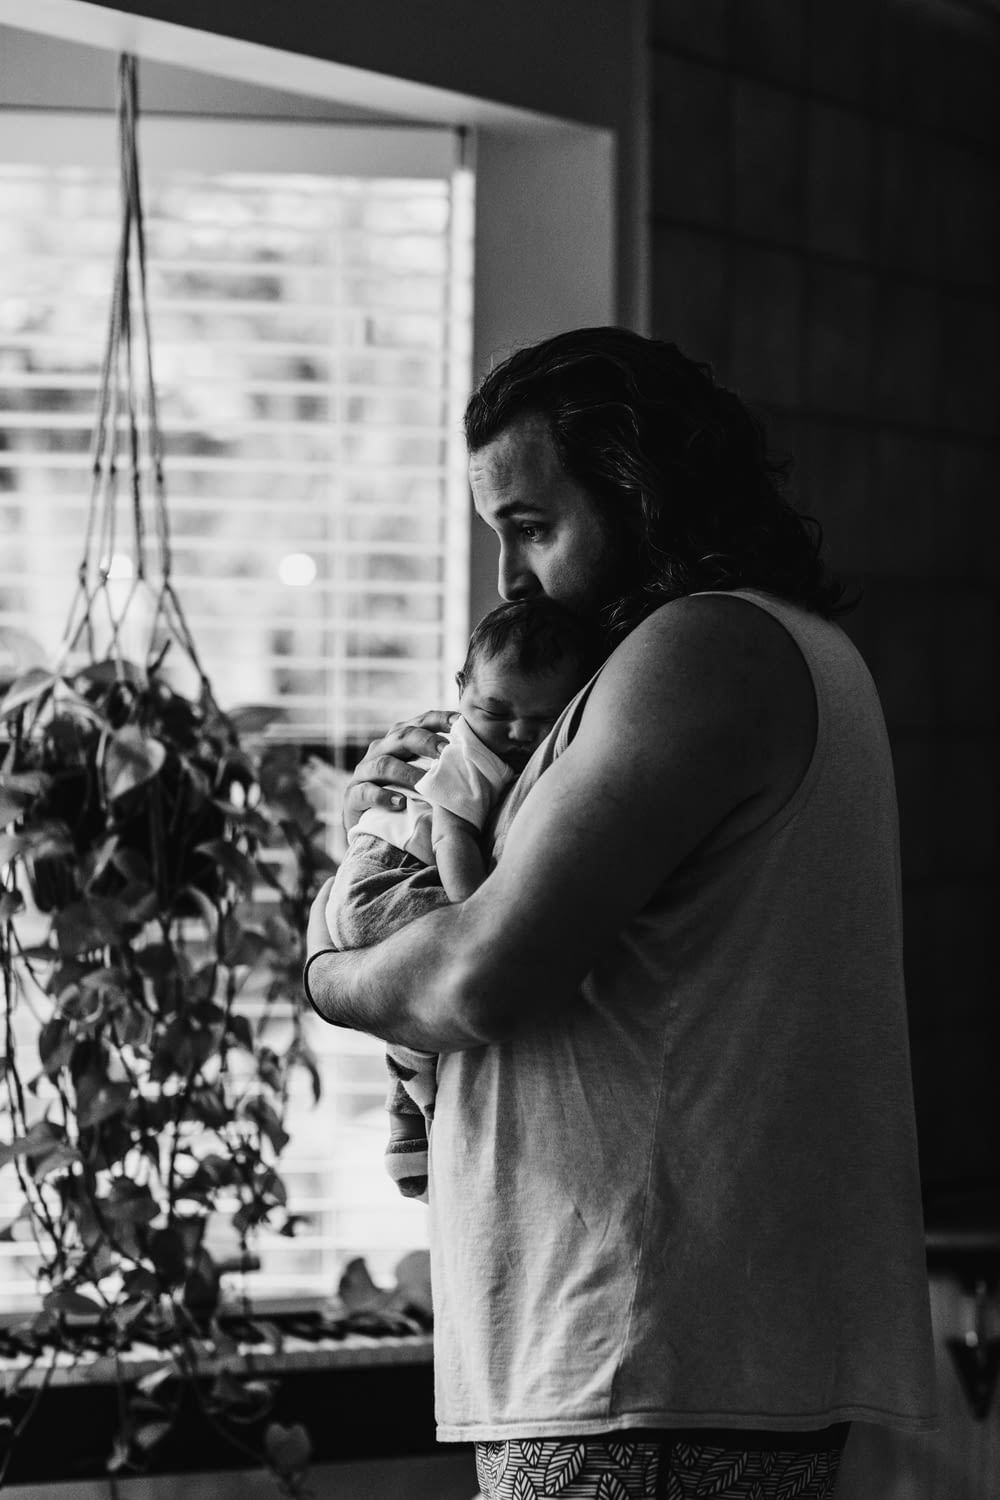 grayscale photography of man wearing tank top carrying newborn baby while standing near window